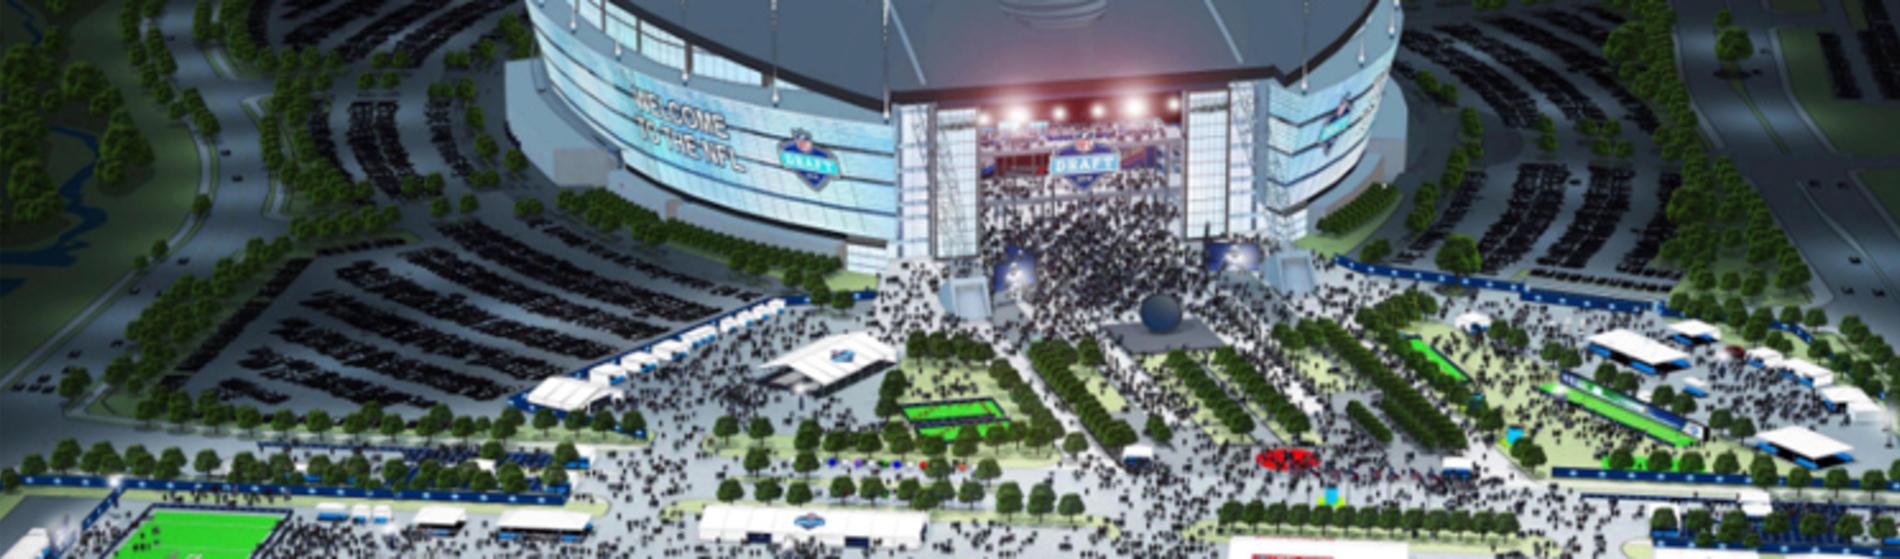 Step Inside: AT&T Stadium - Home of the Dallas Cowboys - Ticketmaster Blog